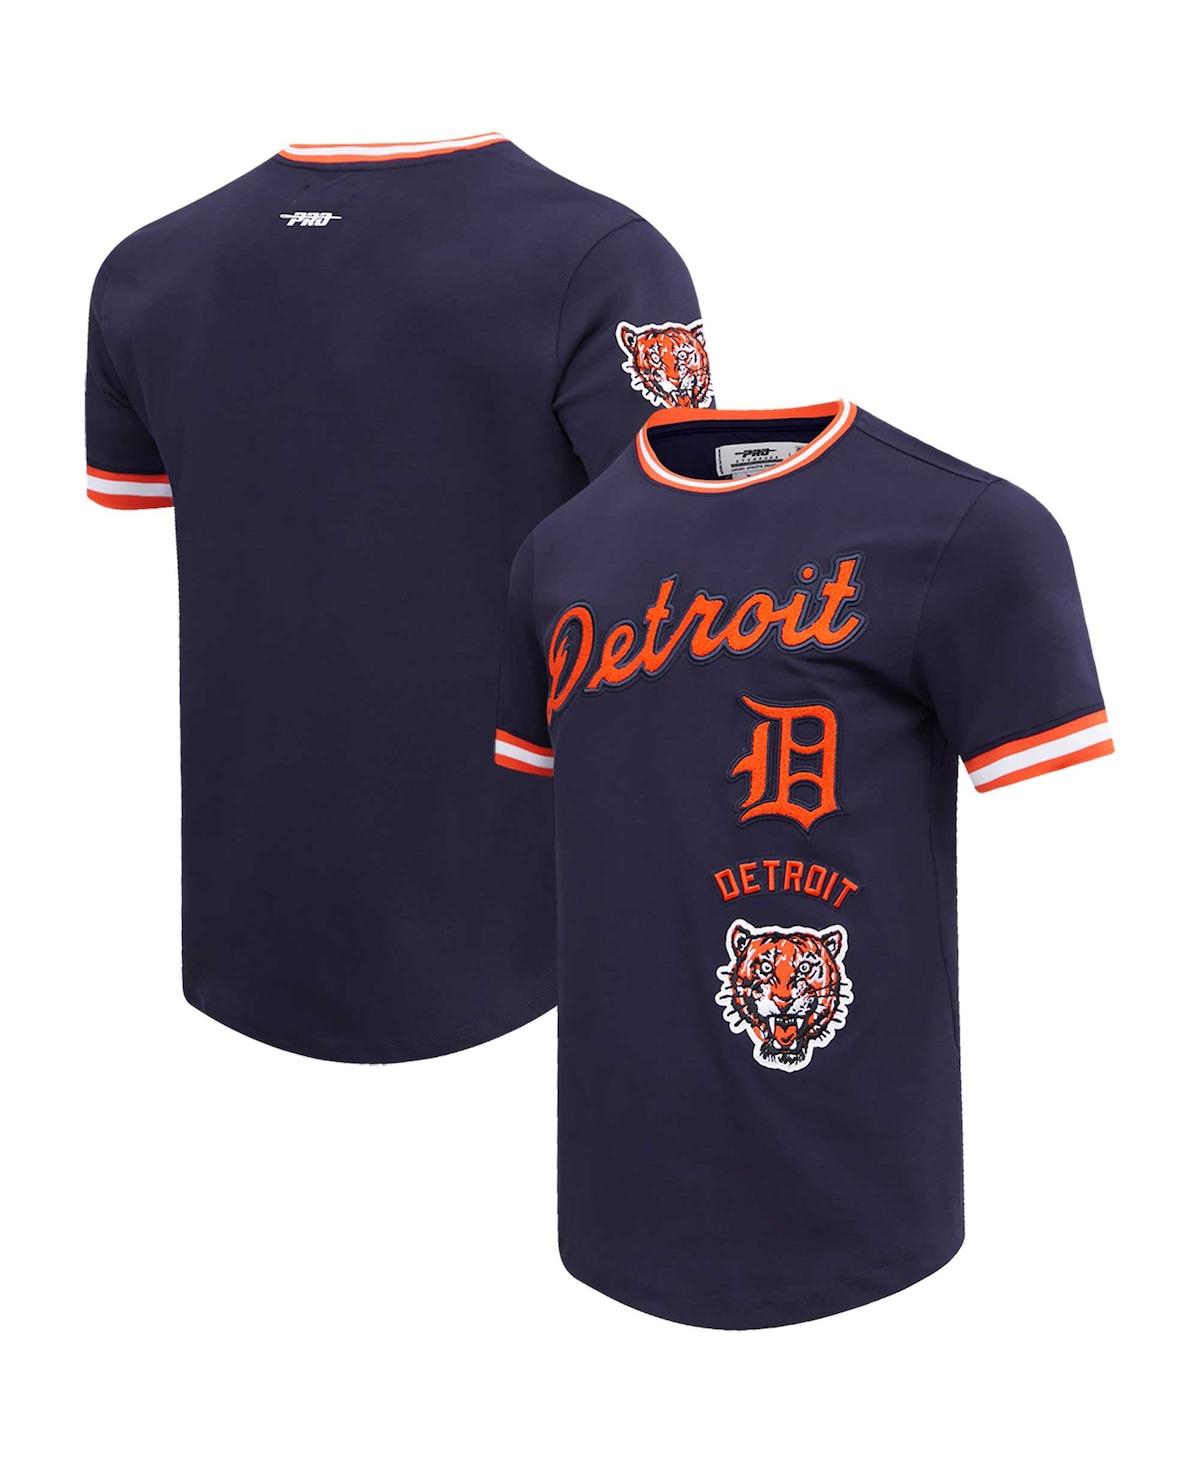 Pro Standard Men's  Navy Detroit Tigers Cooperstown Collection Retro Classic T-shirt